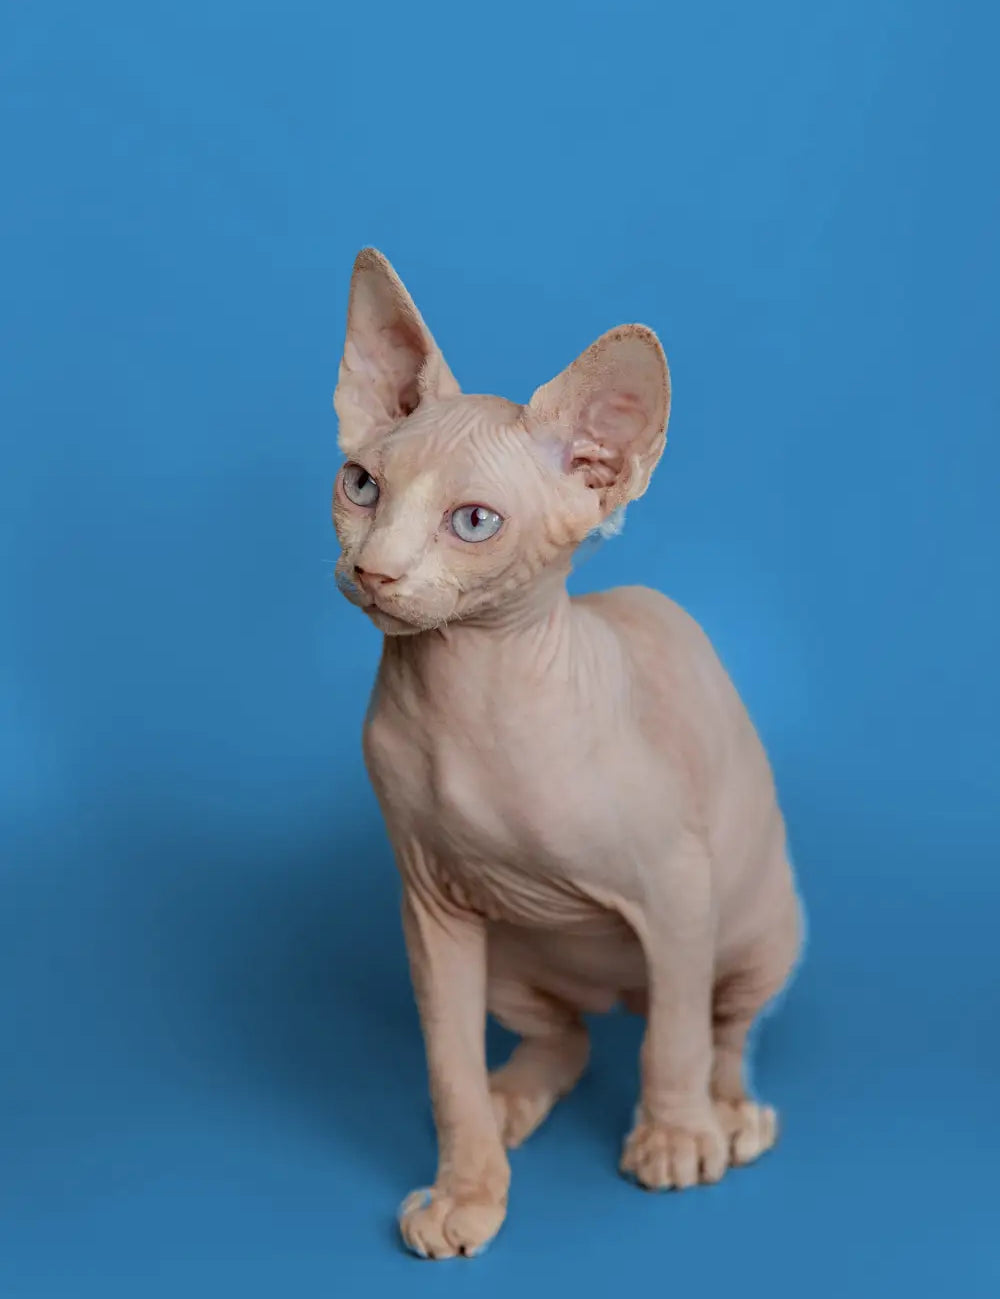 The Playful Side of Sphynx Cats